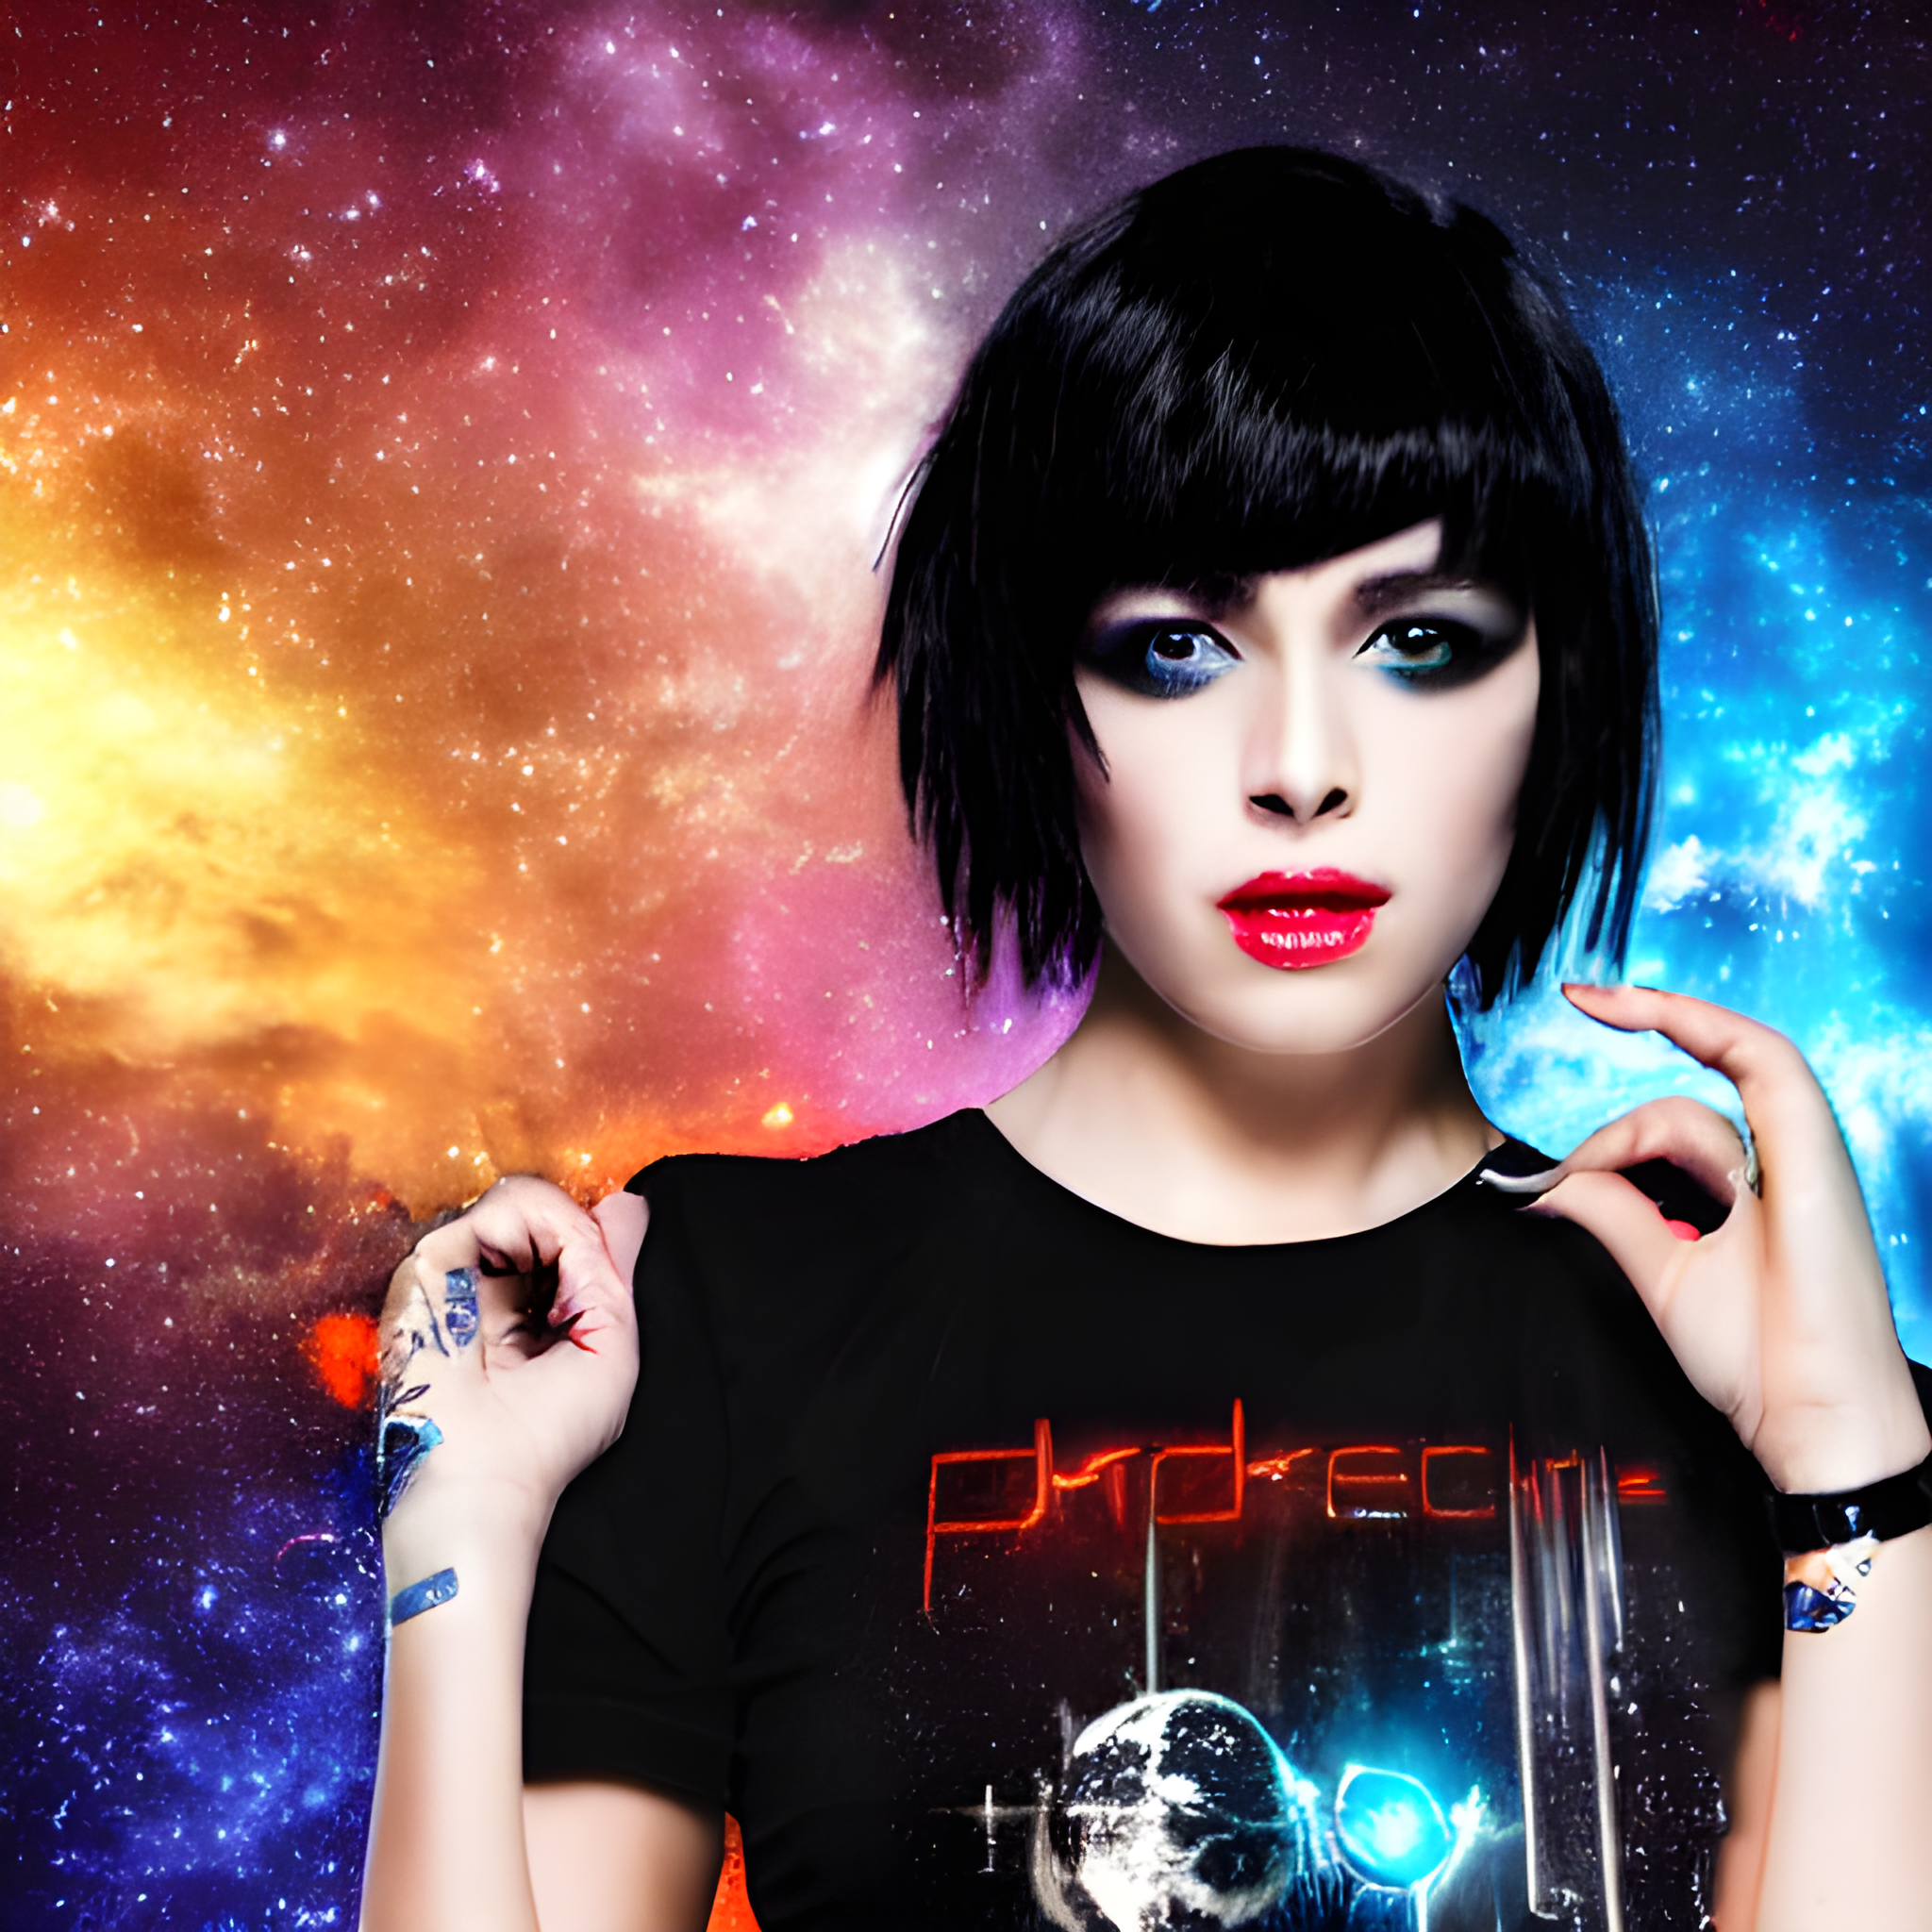 A bright and dark cyberpunk character image of a fierce young woman with short black hair with bangs, wearing a band t-shirt in space --dream-enrich